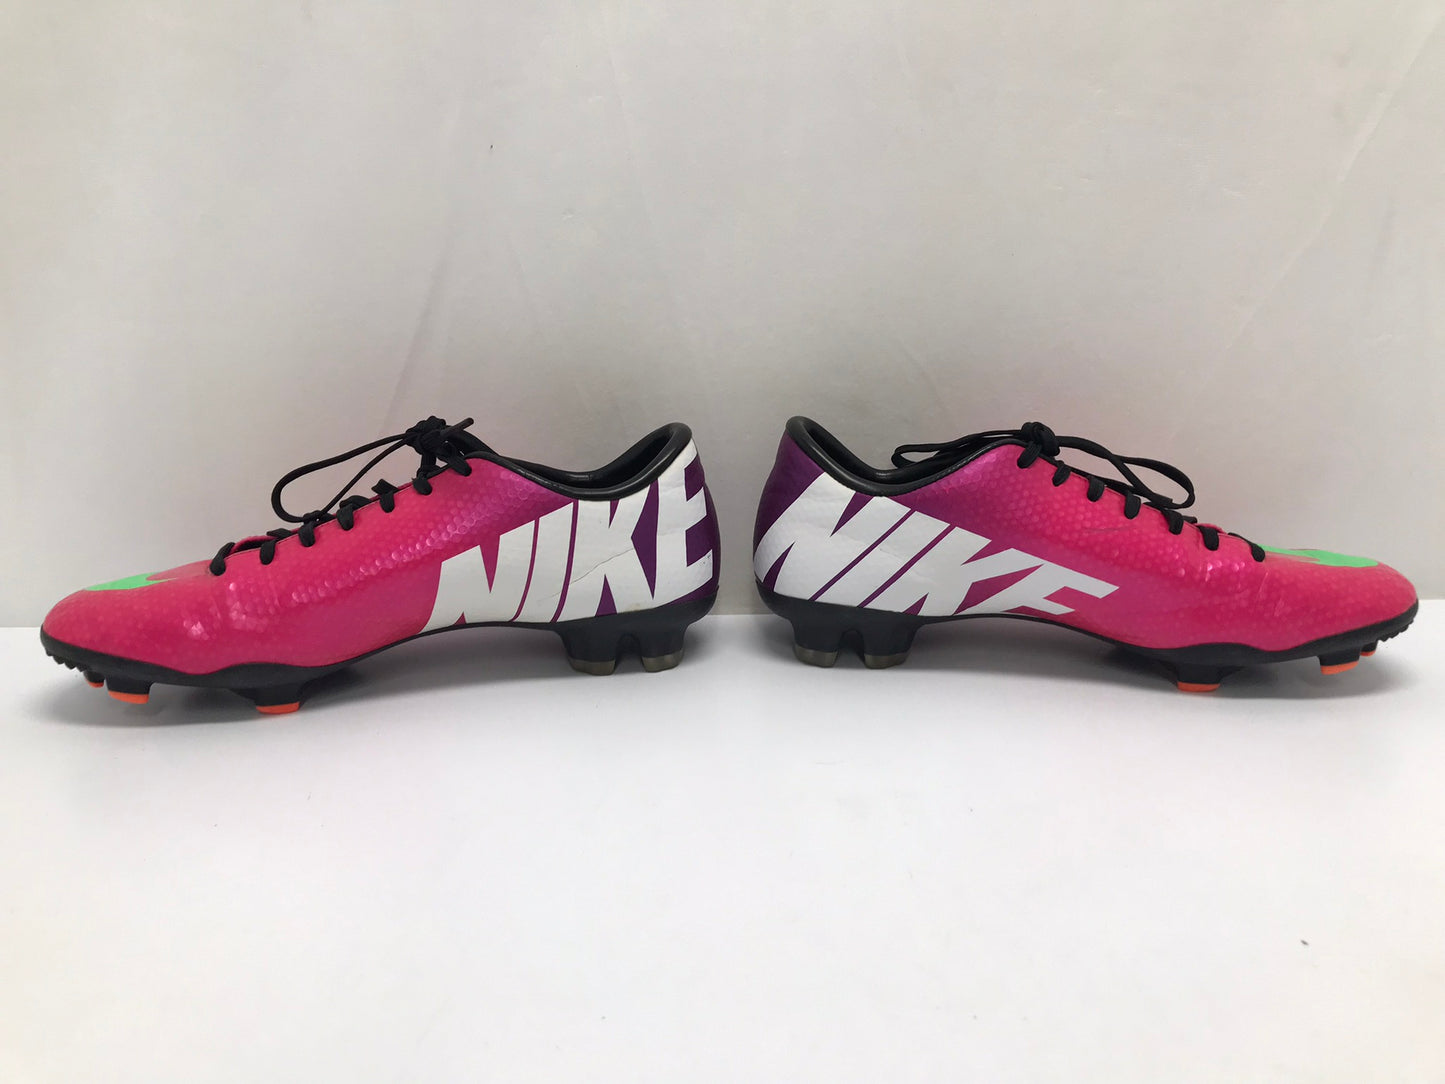 Soccer Shoes Cleats Men's Size 7 Nike Mercurial Purple Pink Lime